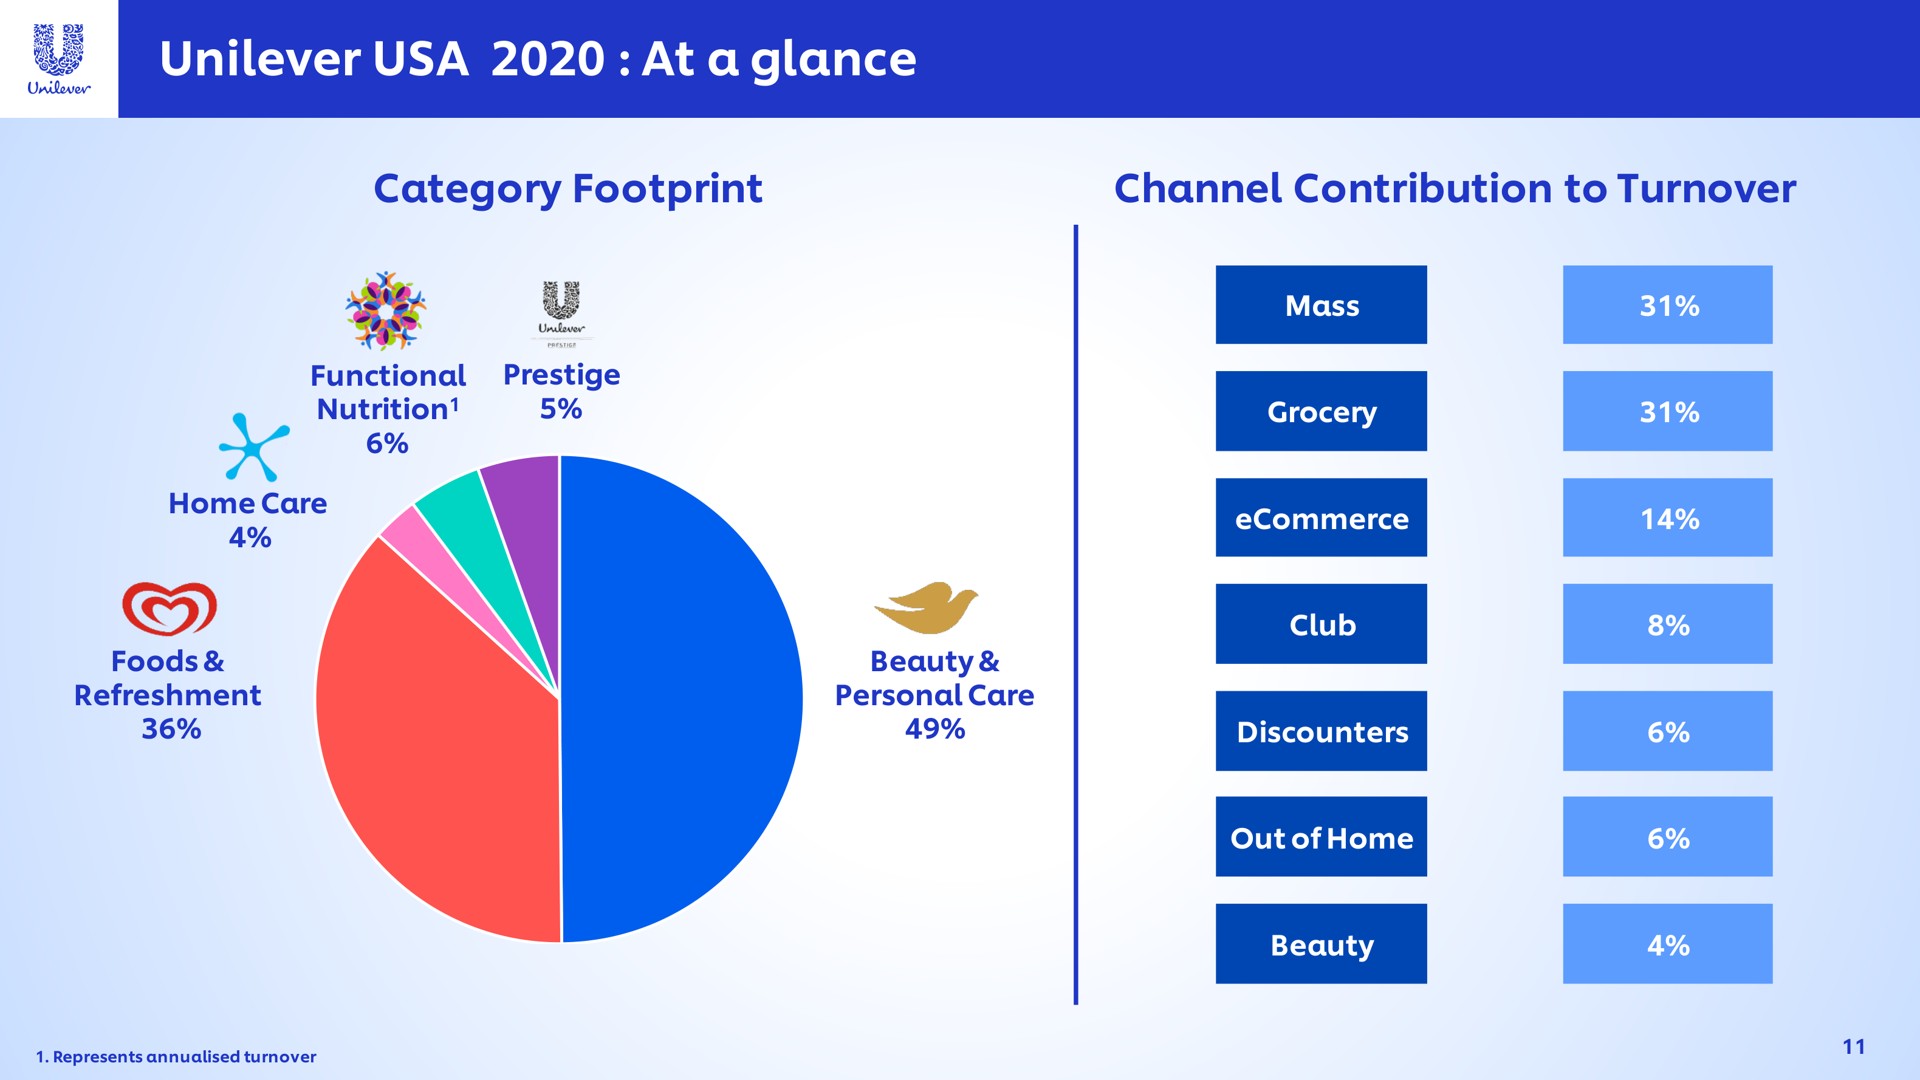 at a glance aglance category footprint channel contribution to turnover | Unilever